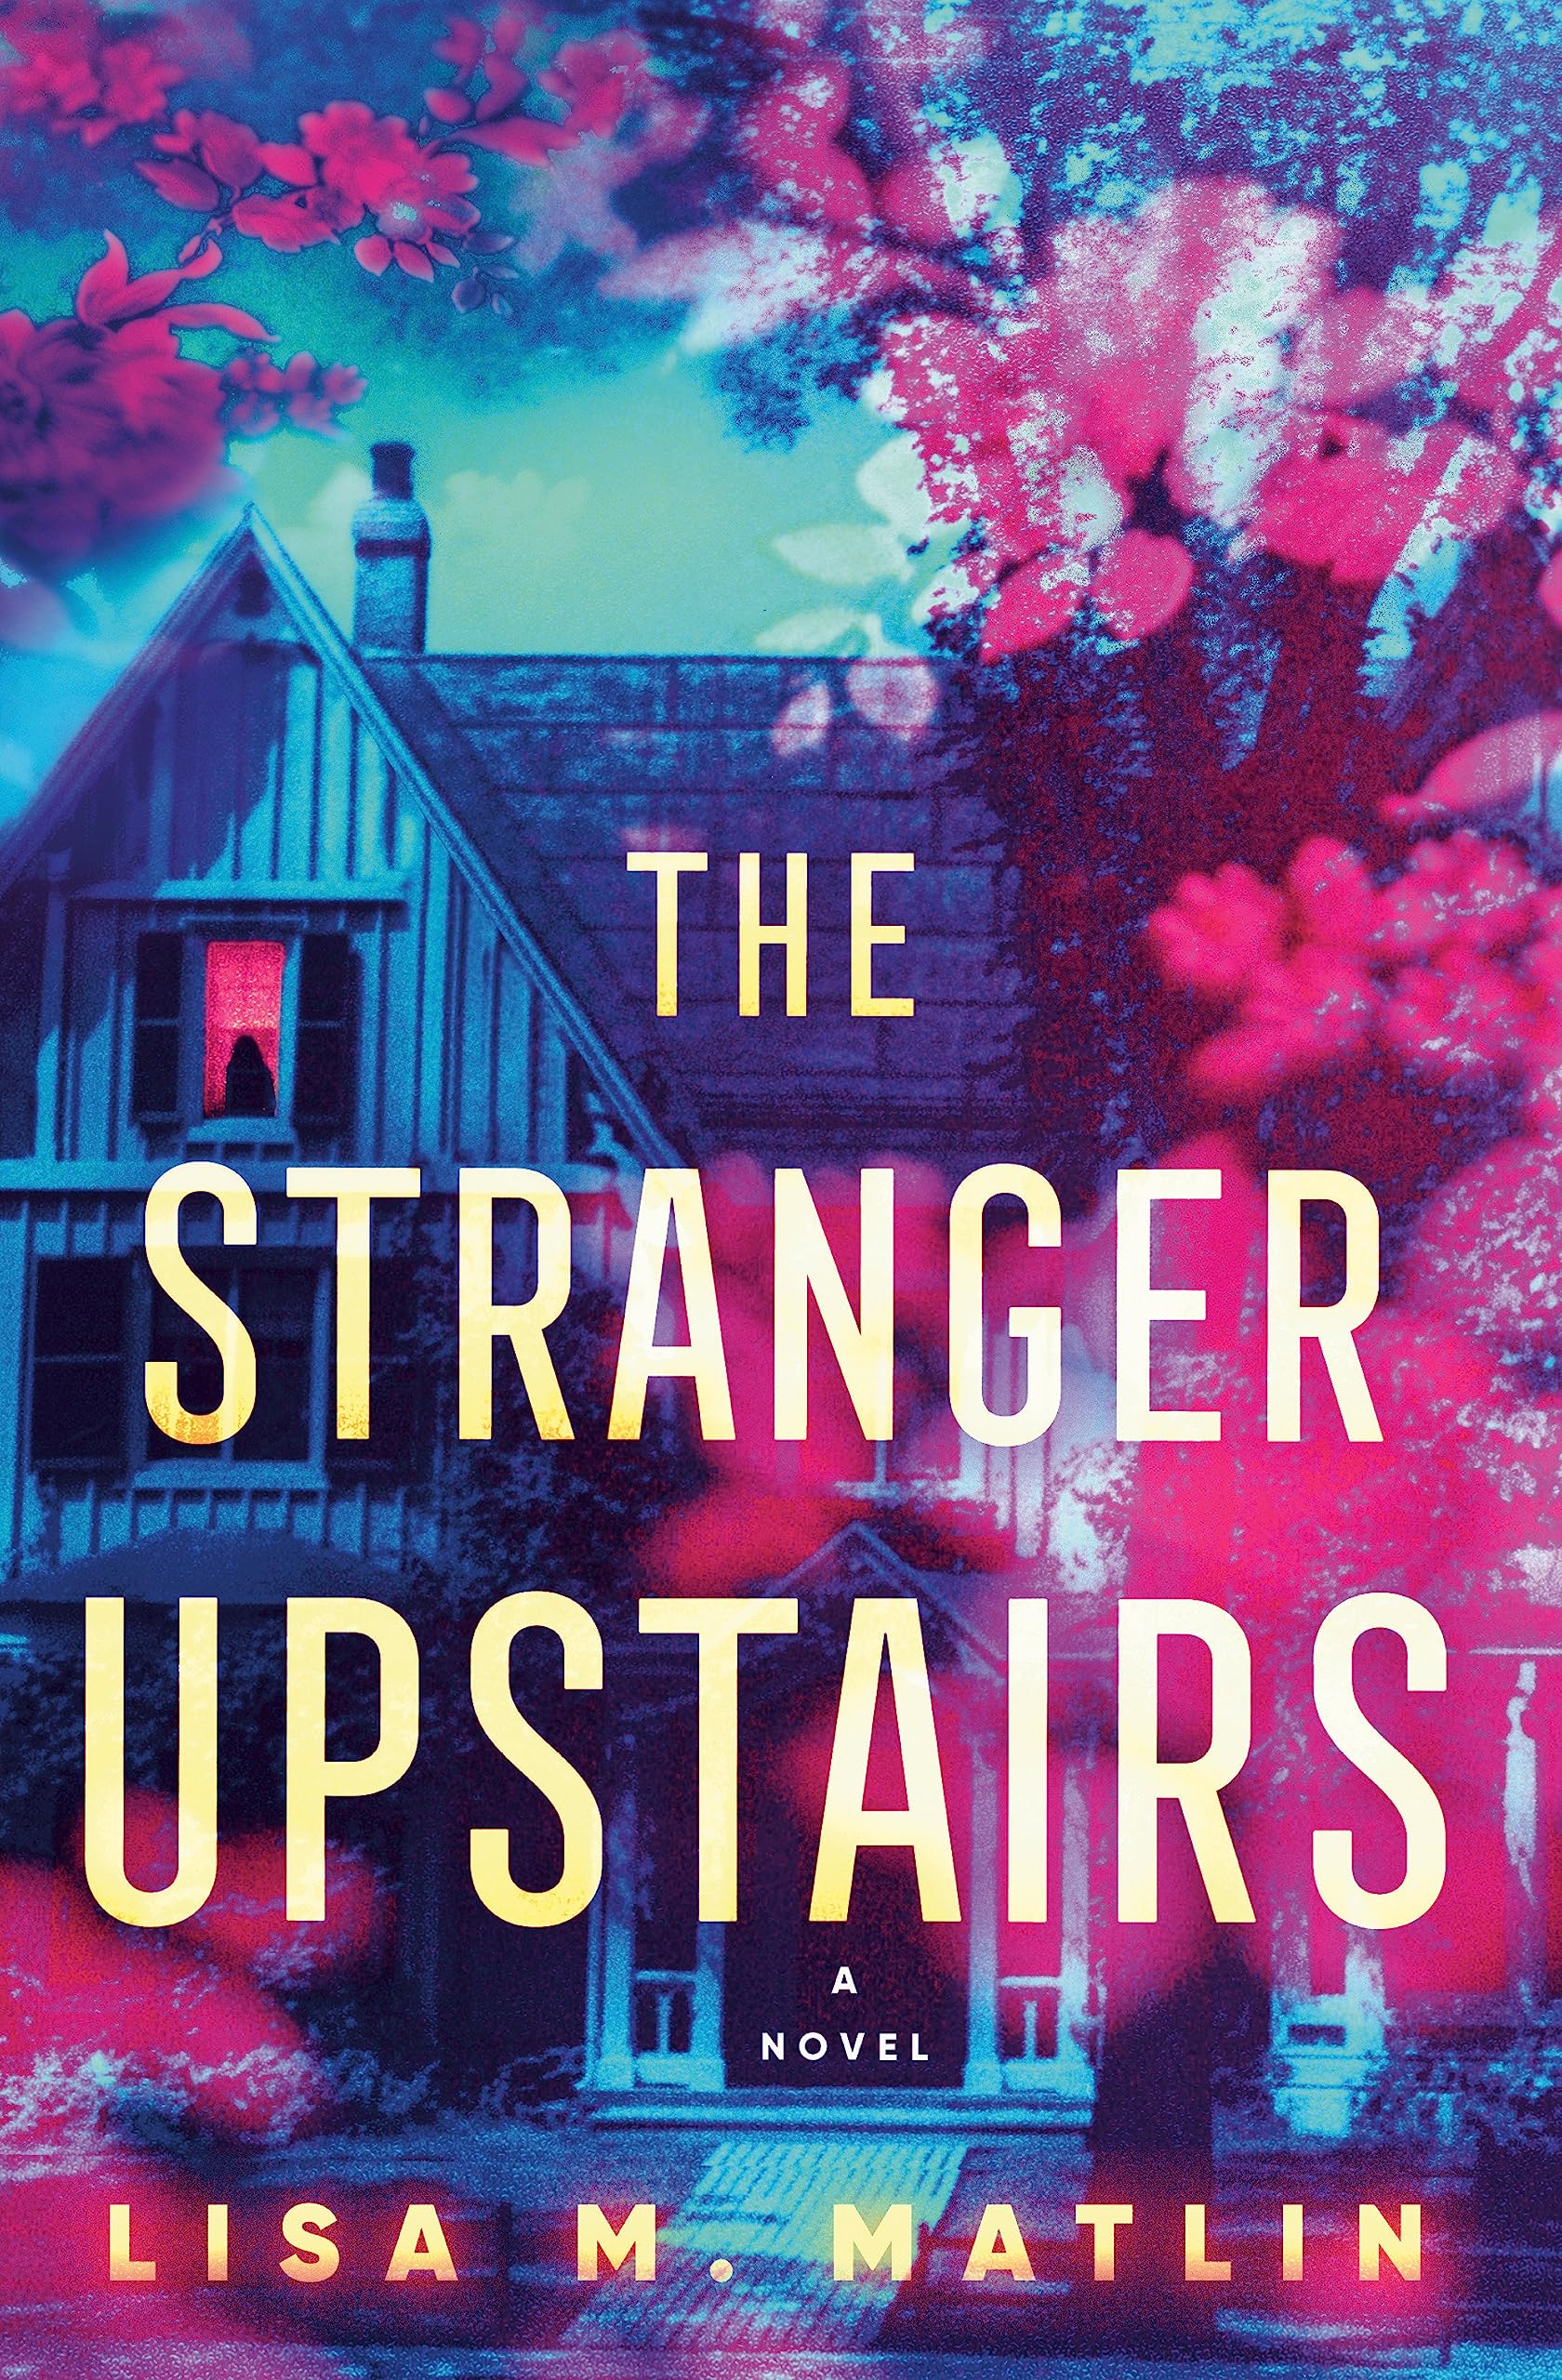 Image for "The Stranger Upstairs"